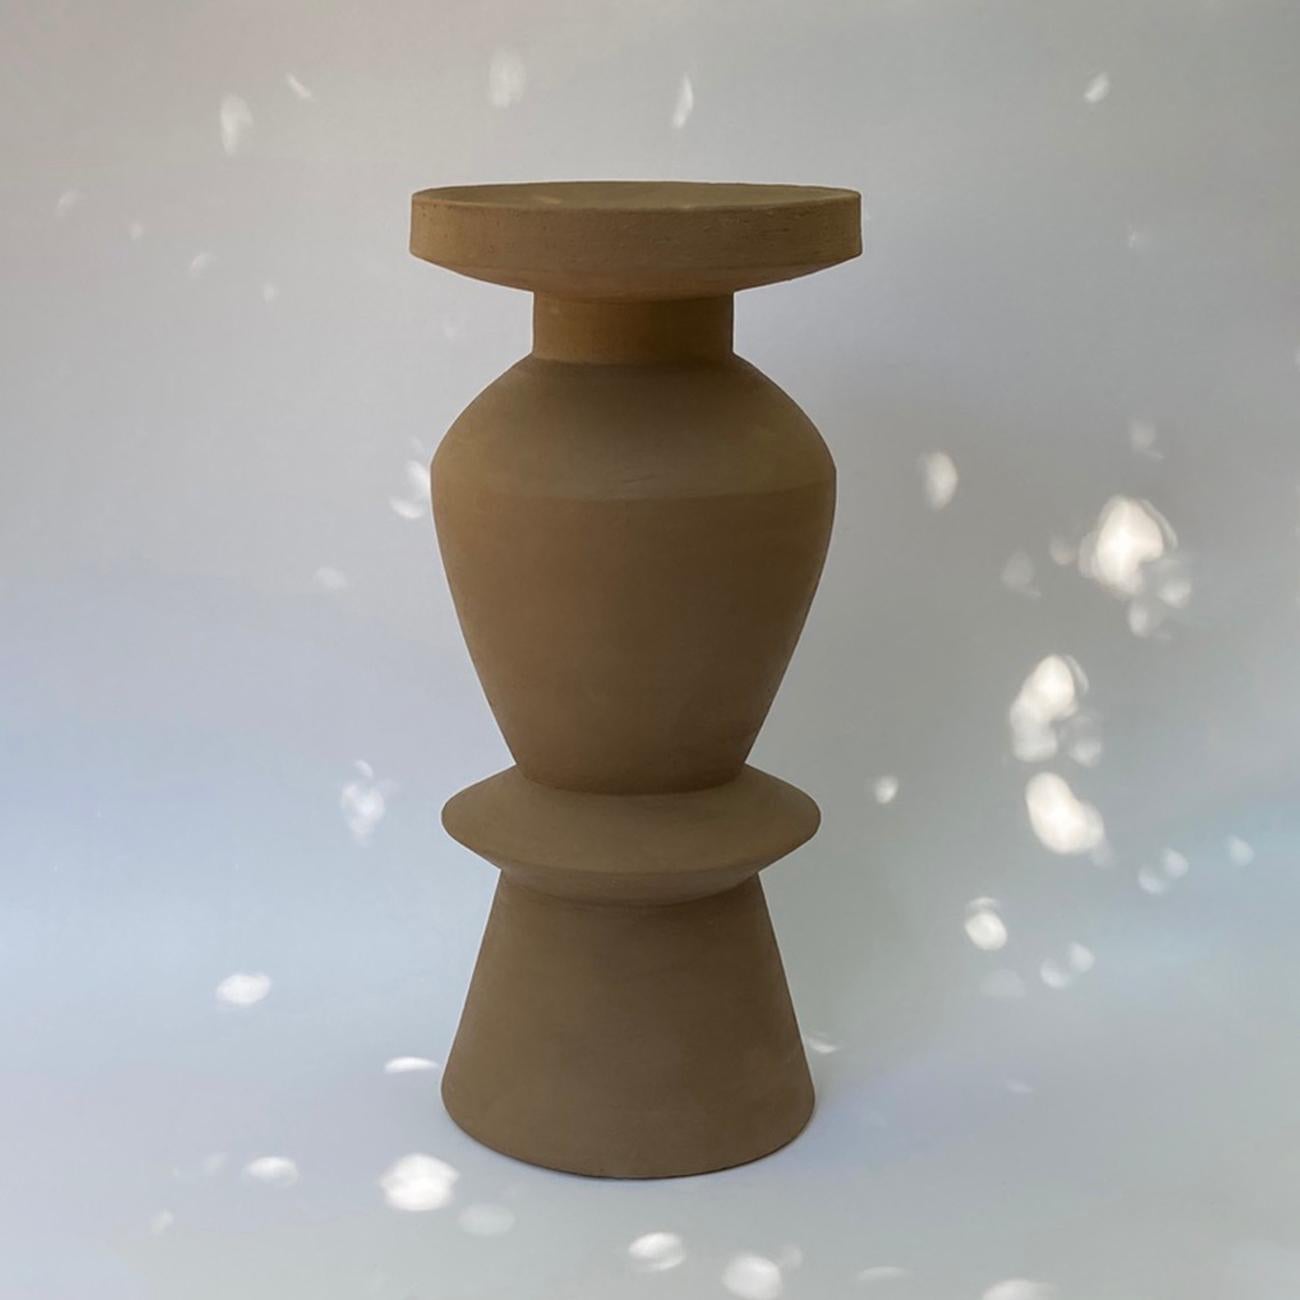 Hand-Crafted Terracotta Beige Rosé 3 Union Stool by Lea Ginac